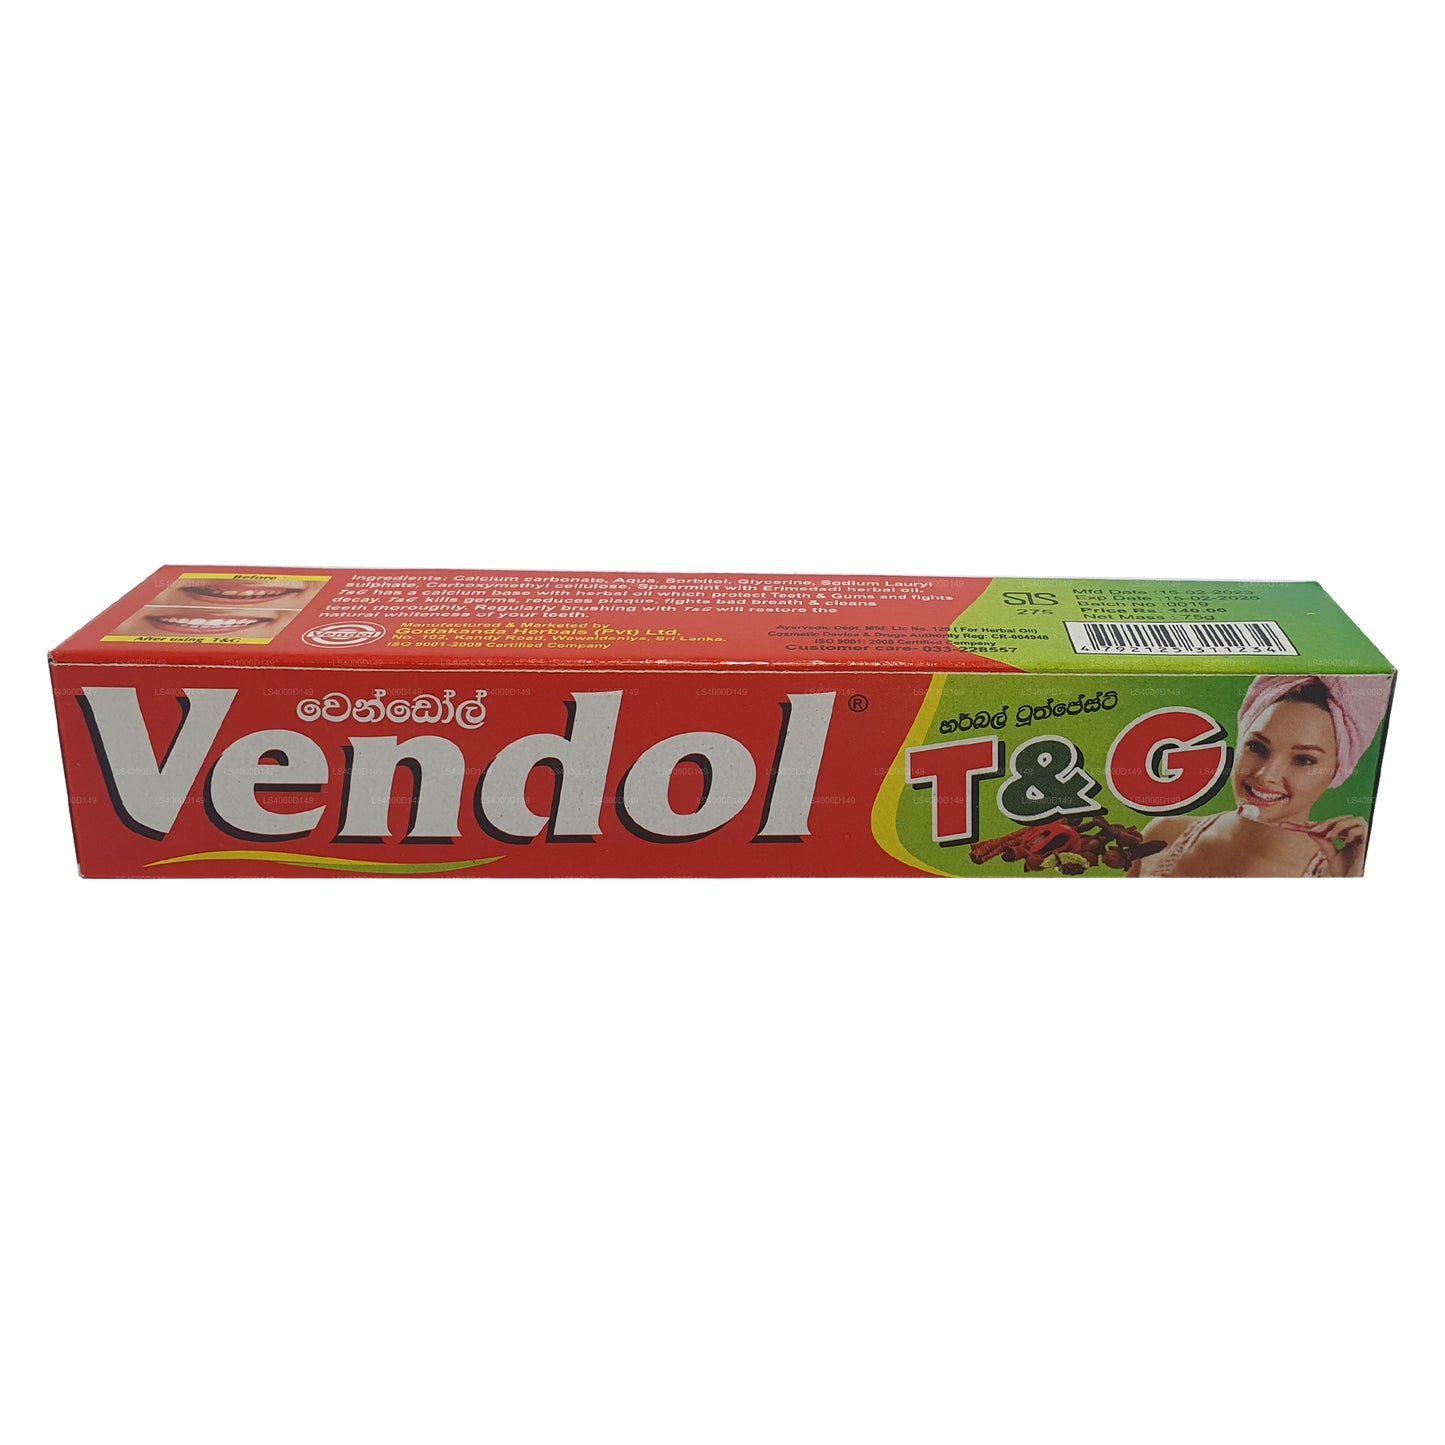 Vendol T and G Toothphaste (135 克)